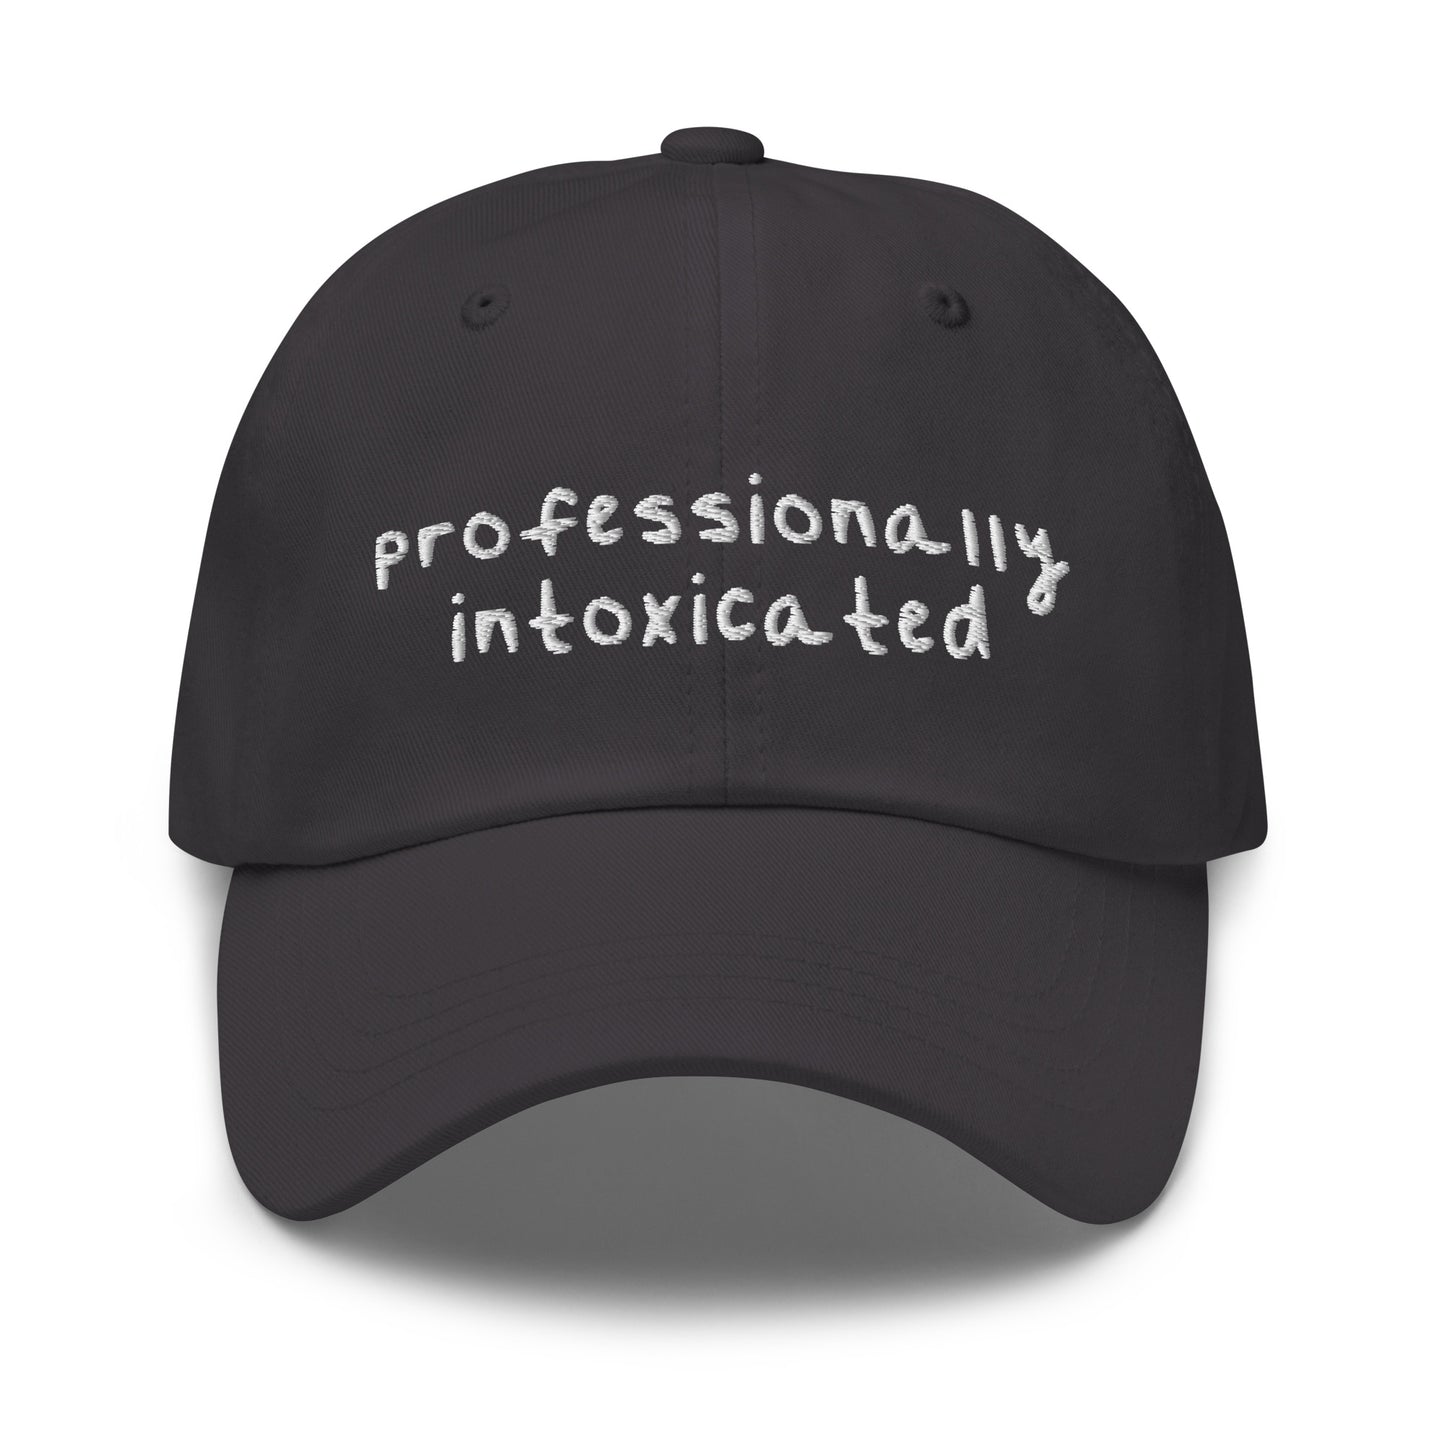 Professionally Intoxicated (Embroidered) hat